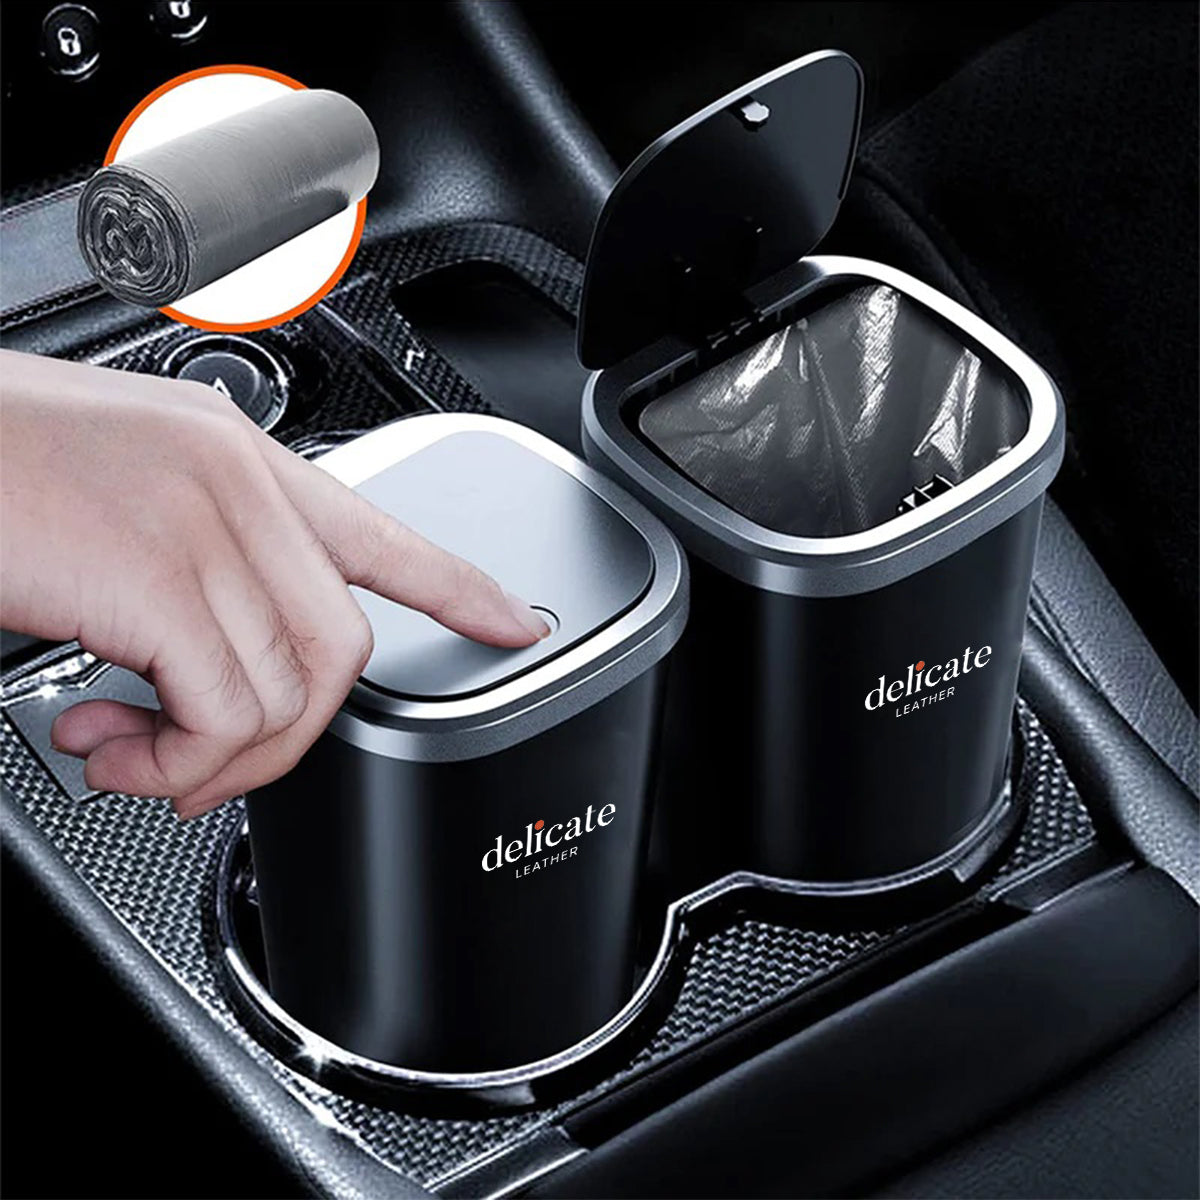 Car Trash Cans, Custom For Your Cars, Compact & Durable Car Accessories for Interior Use 2 Pack, Practical Car Organizers and Storage Cups with Pop-Up Open, Car Accessories VE11993 - Delicate Leather